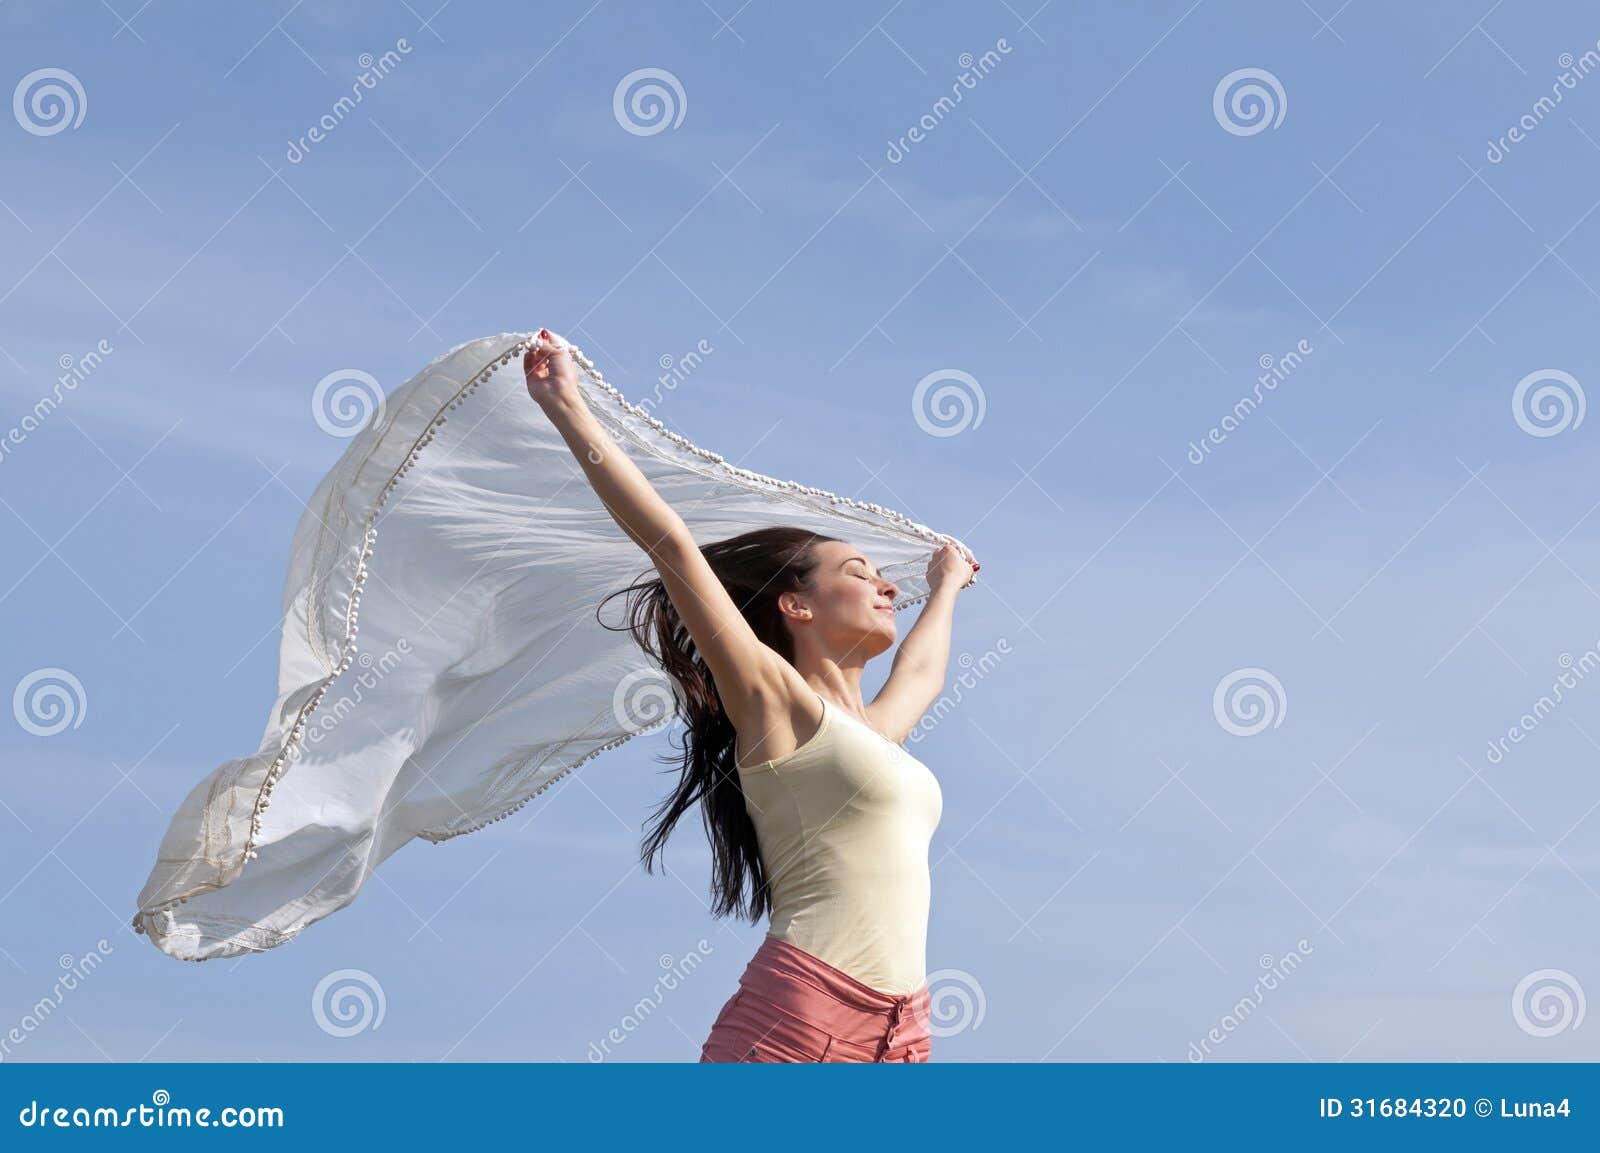 Woman with flying scarf stock photo. Image of pretty 31684320